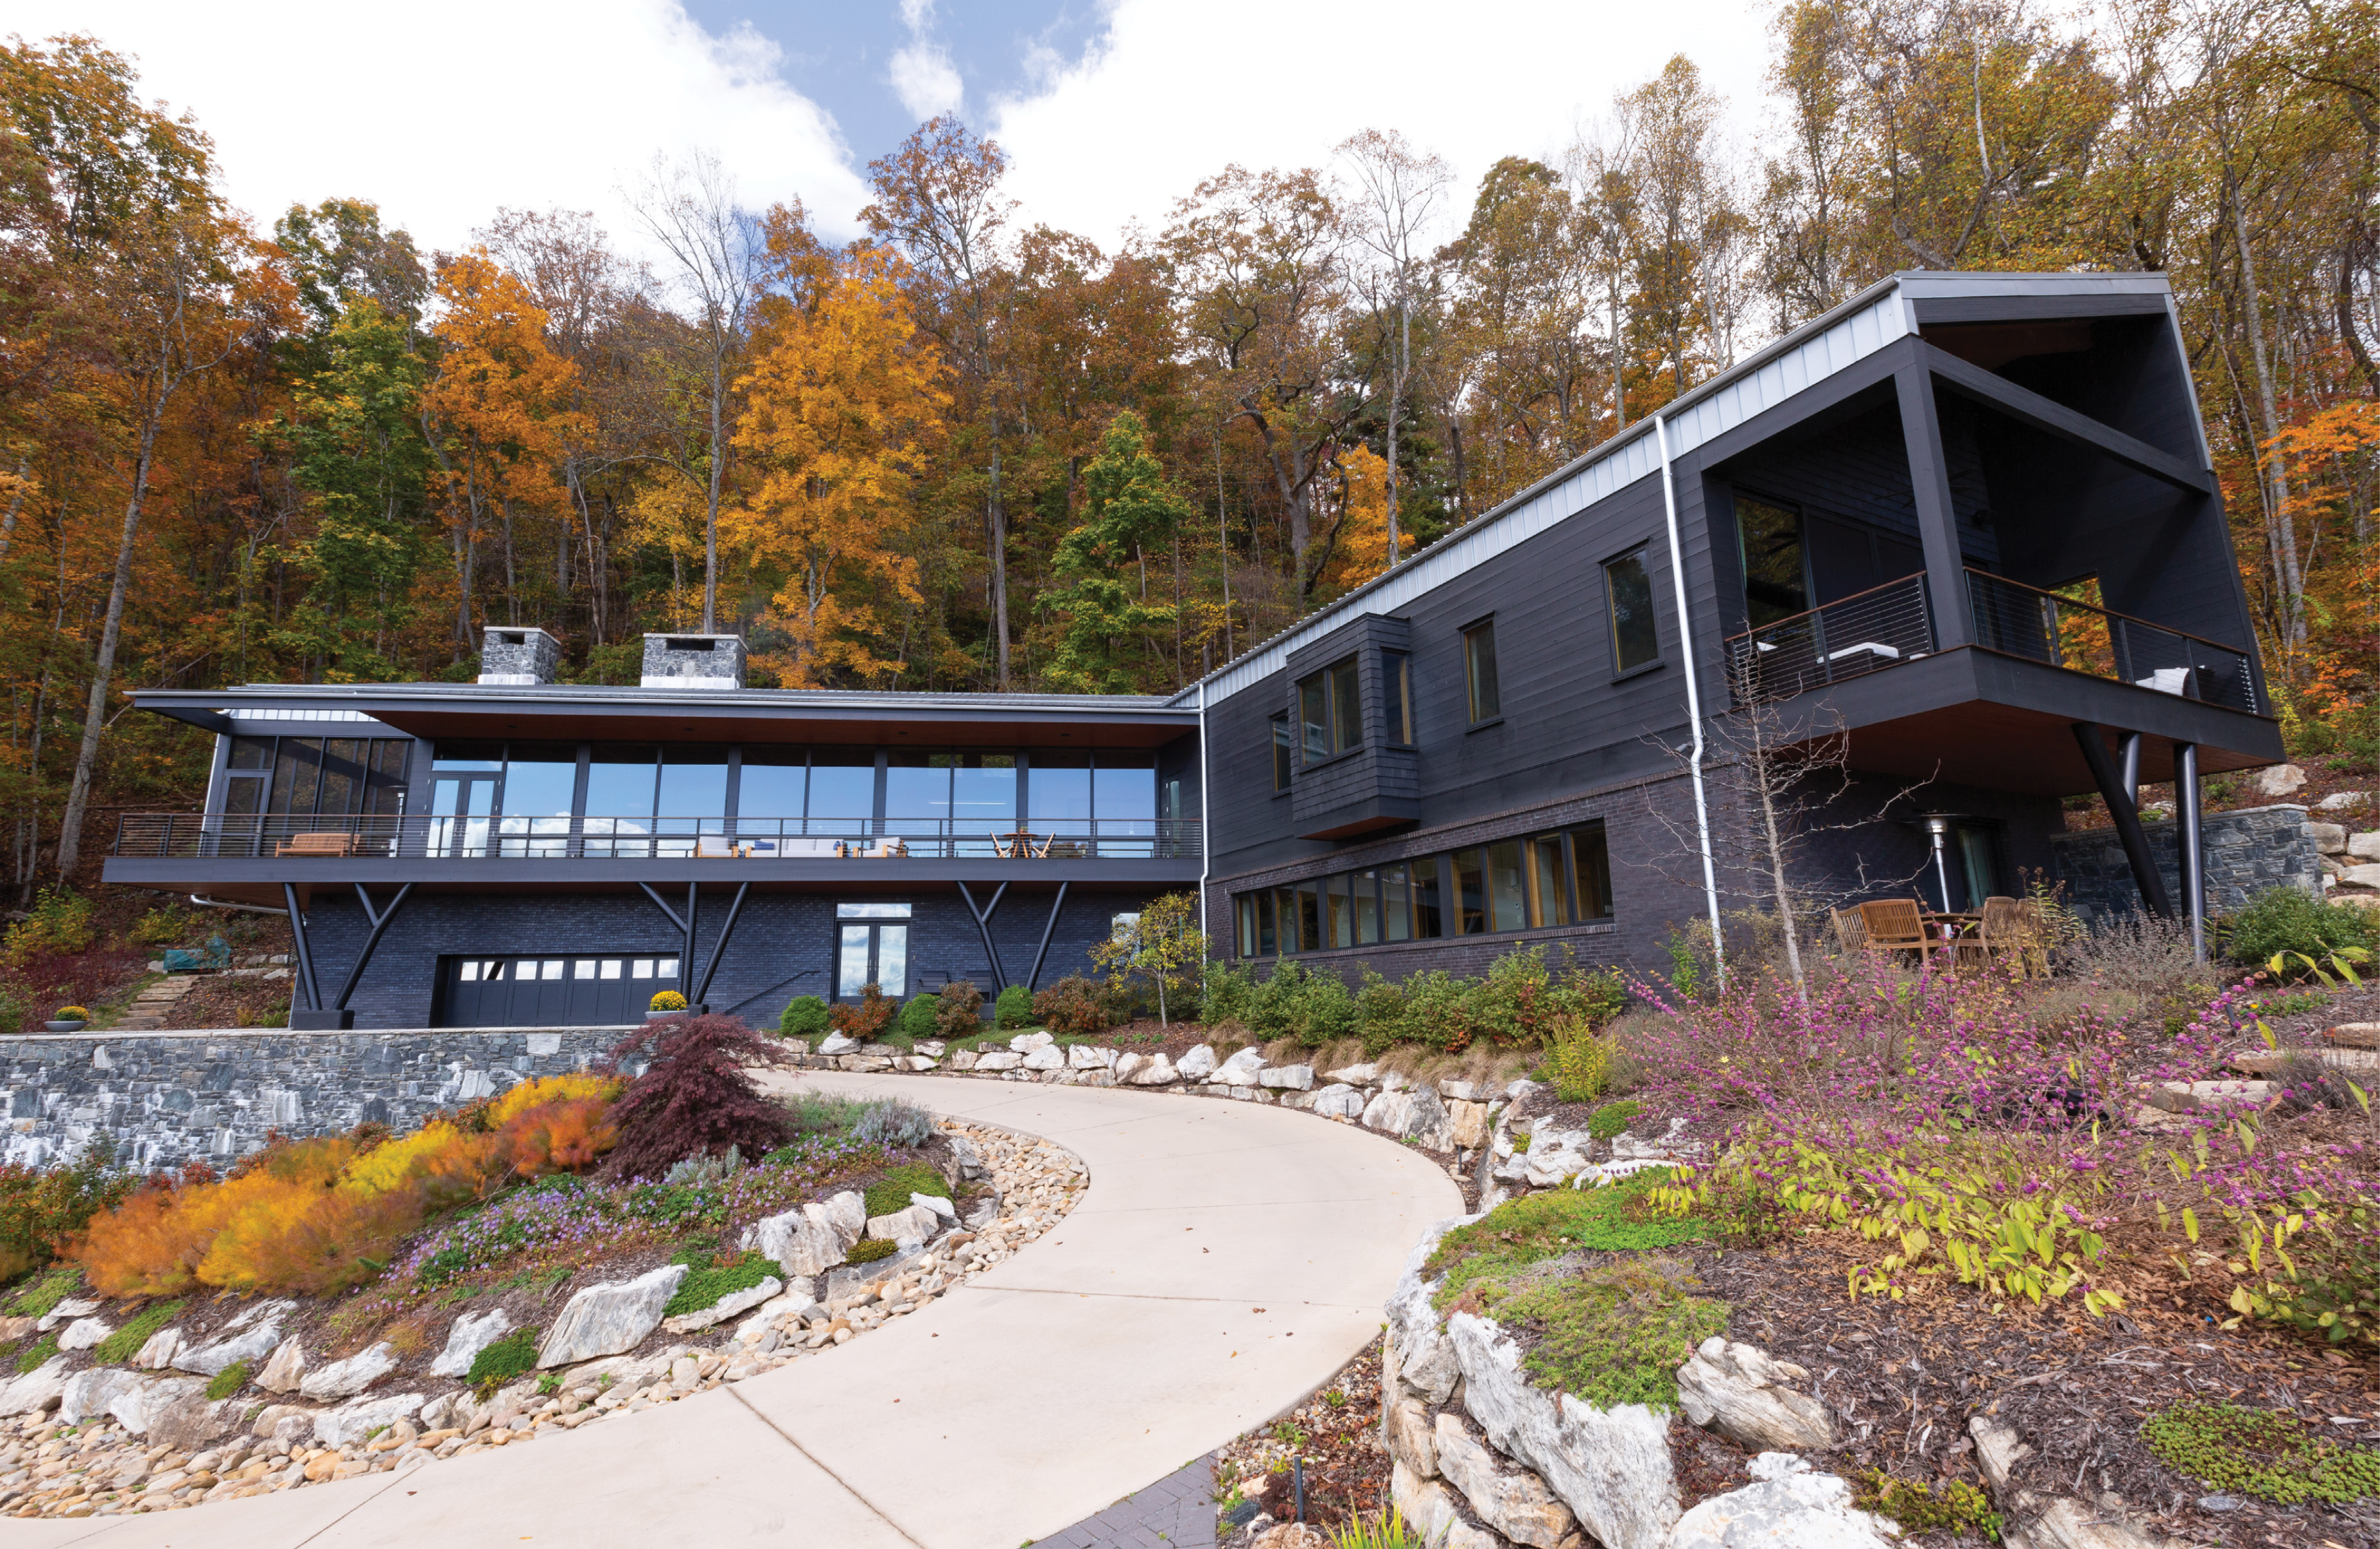 A Rare Gem : Through a visionary’s lens, a modern Asheville abode strikes unexpected balance between darkness and radiance